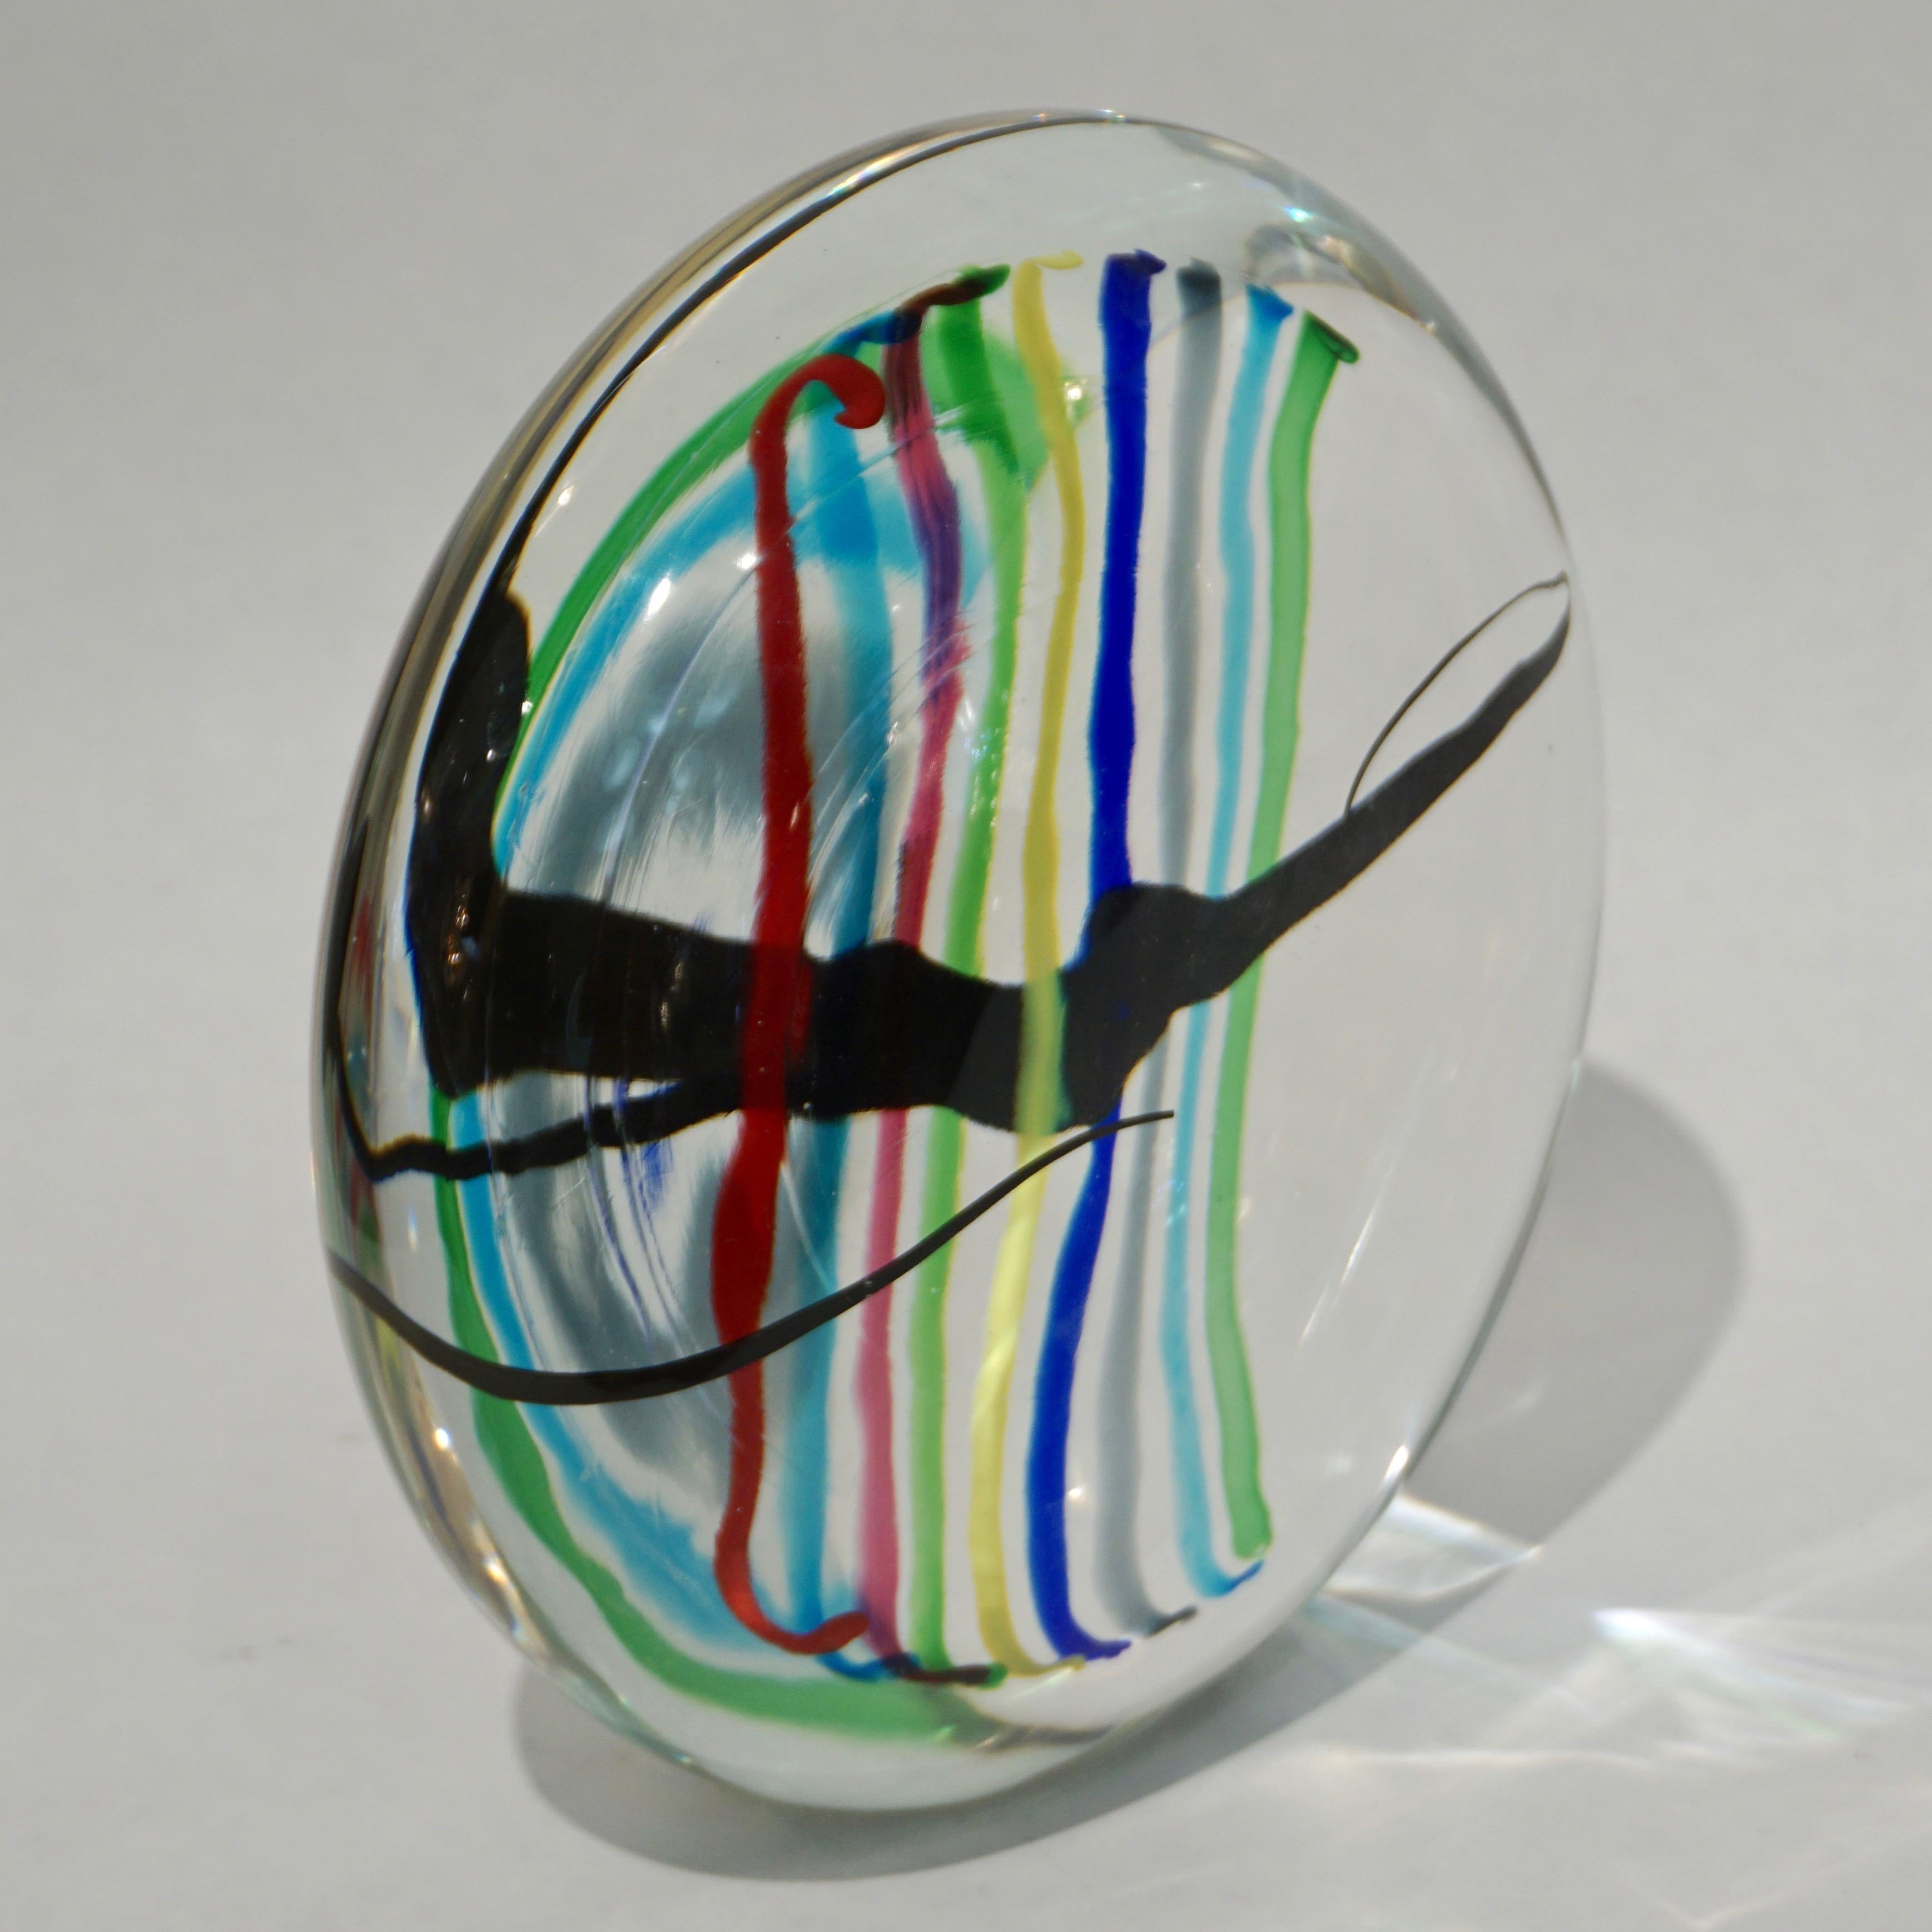 Formia 1970s vintage Italian modern design round sculpture or centerpiece, of organic shape, in blown crystal clear Venetian Murano glass decorated with rainbow stripes in red, aqua blue, pink, apple green, yellow, dark blue, grey and a freeform